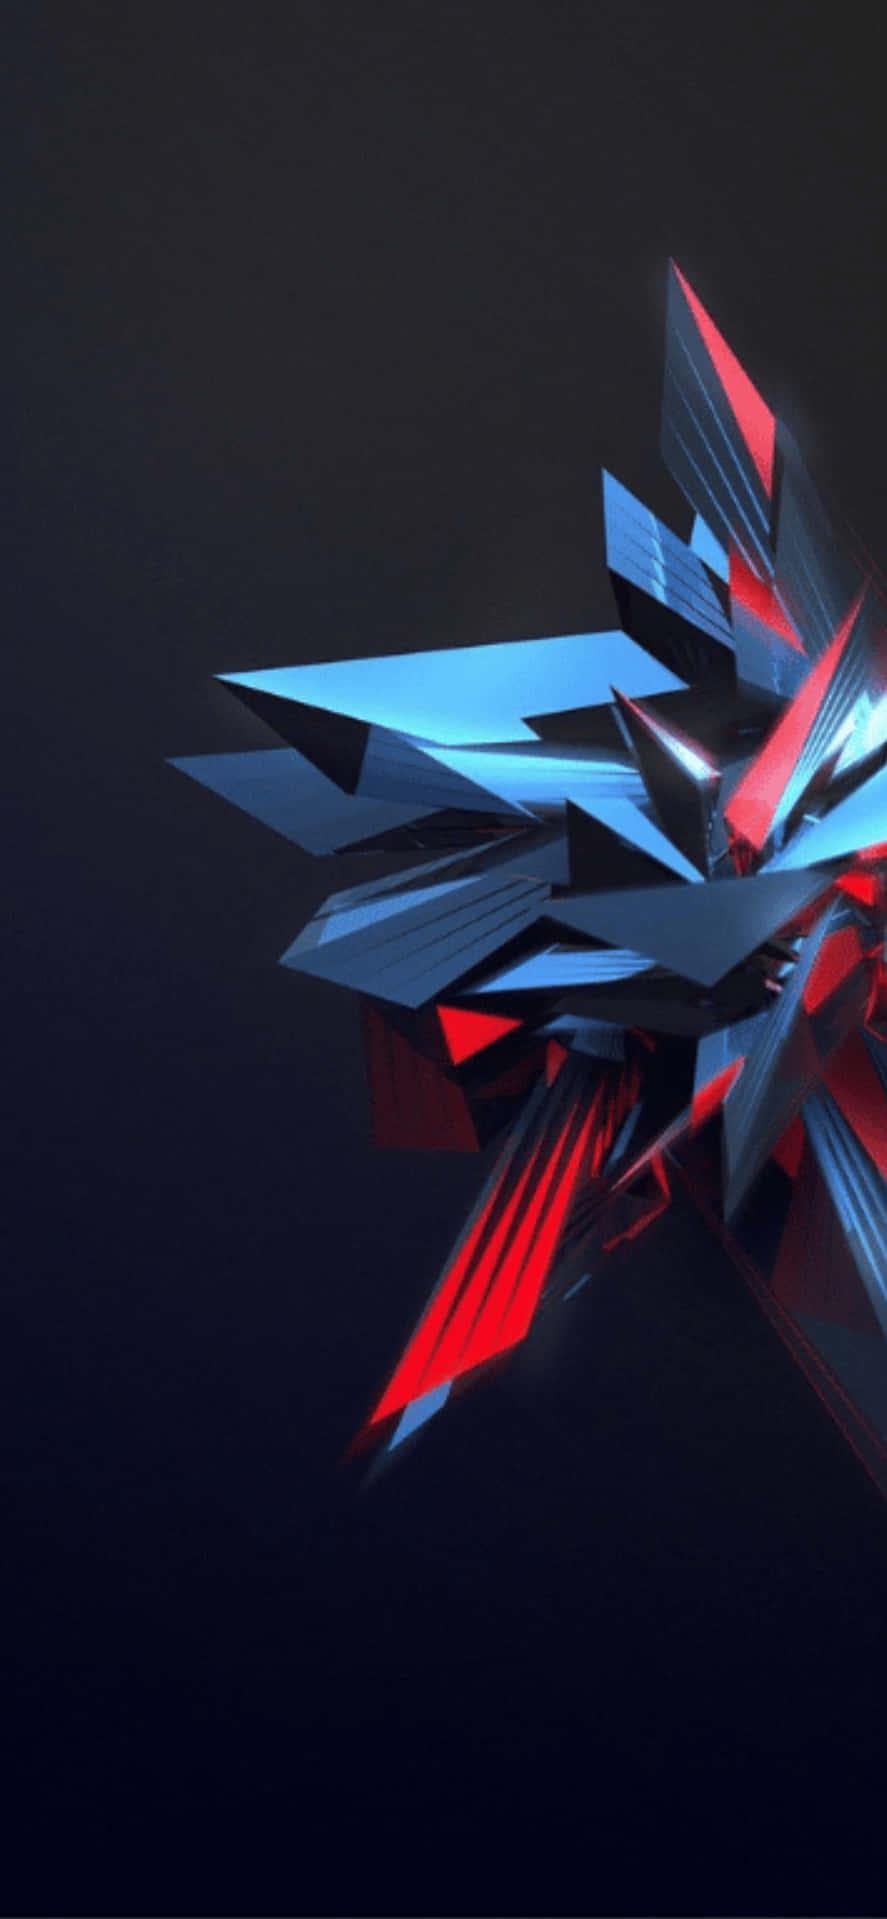 Download A Blue And Red Abstract Design On A Black Background